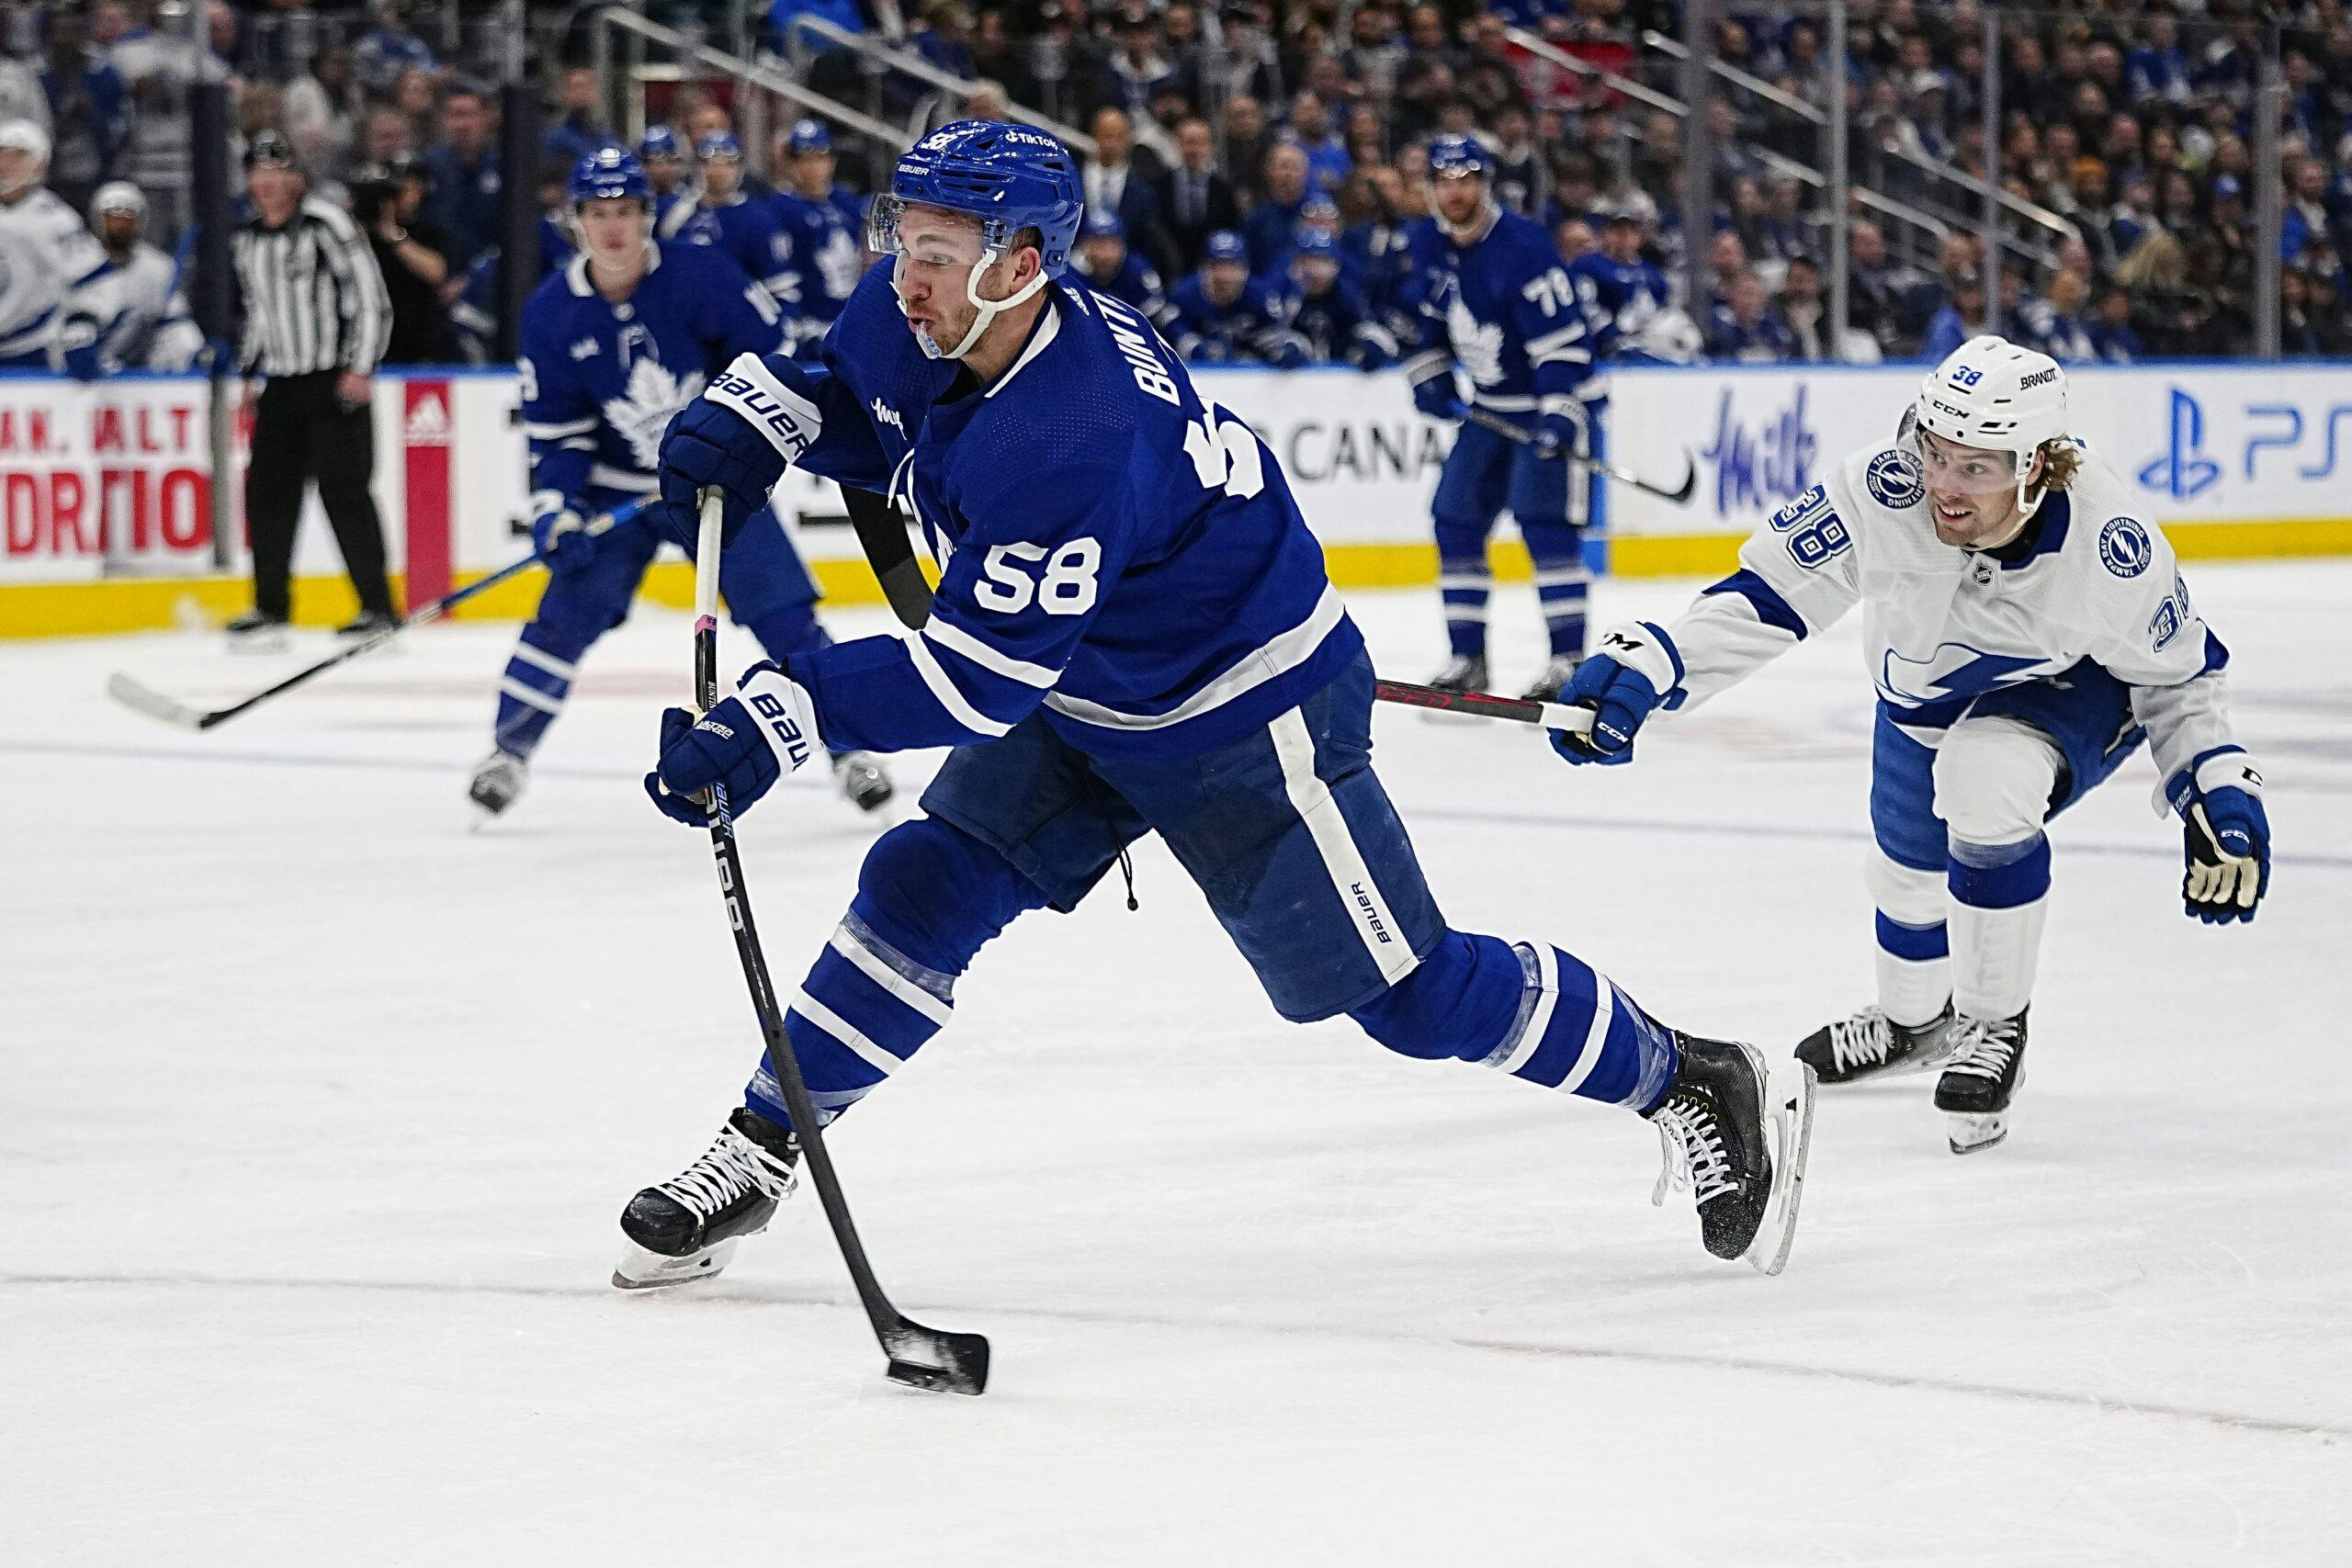 Toronto Maple Leafs’ Michael Bunting will sit out Game 5 vs. Tampa Bay Lightning